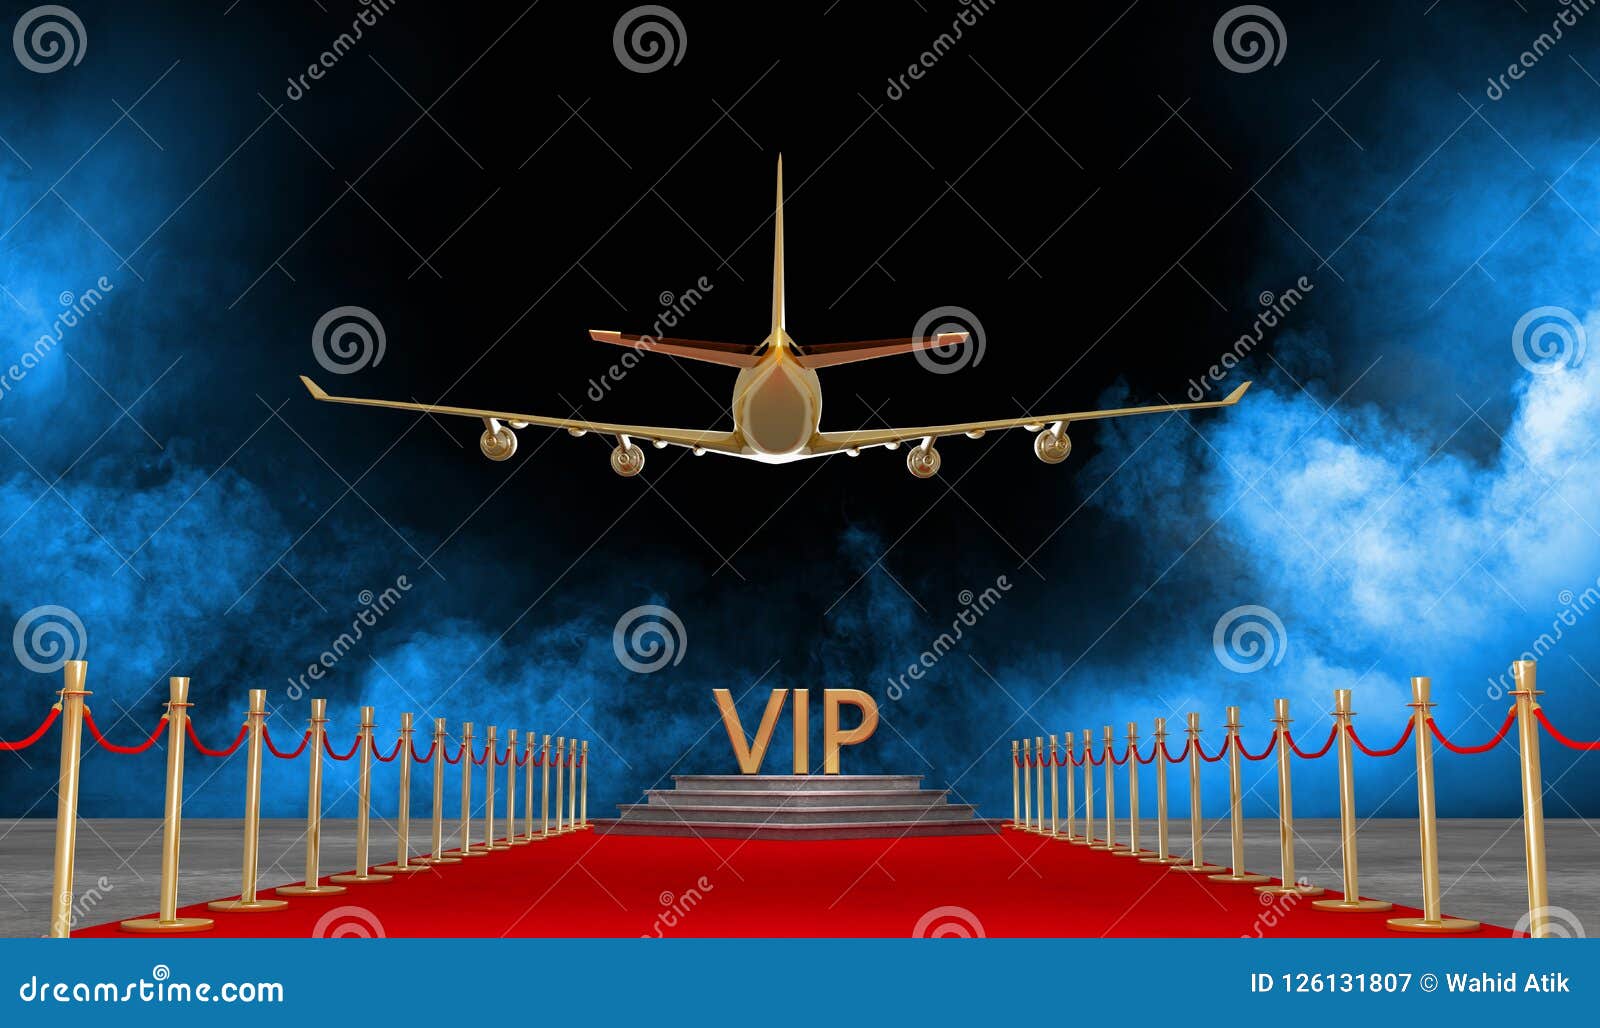 Red Carpet Private Jet With A Luxury Vip Stock Illustration Illustration of background, iftar